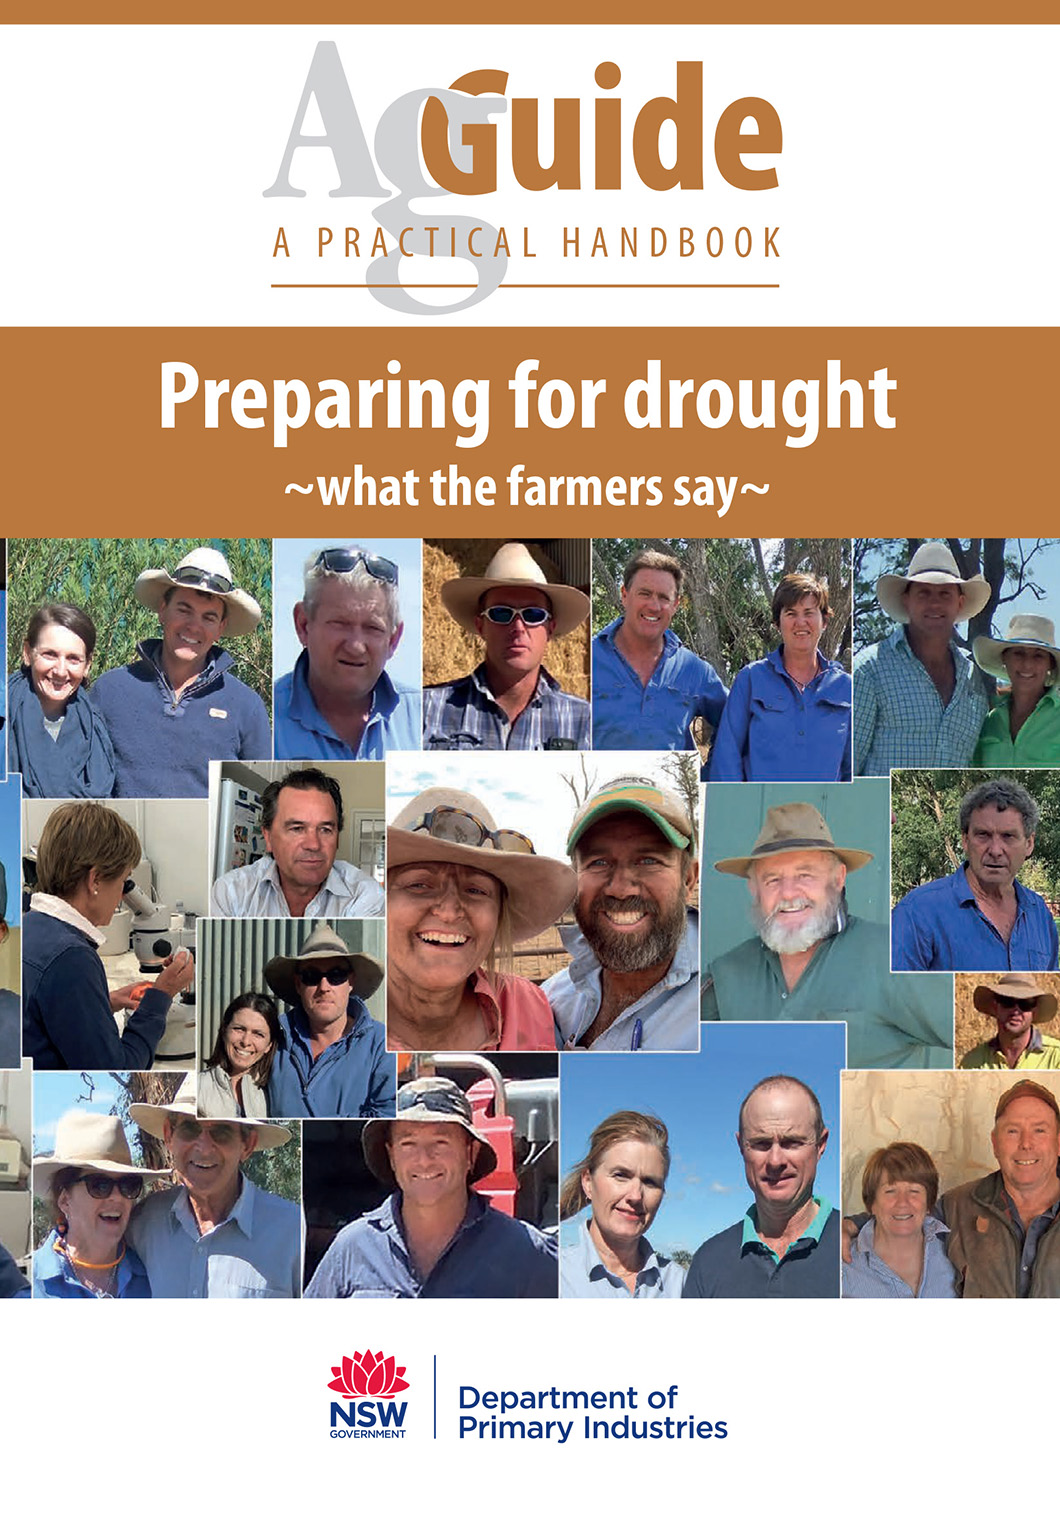 Preparing for Drought: What the farmers say